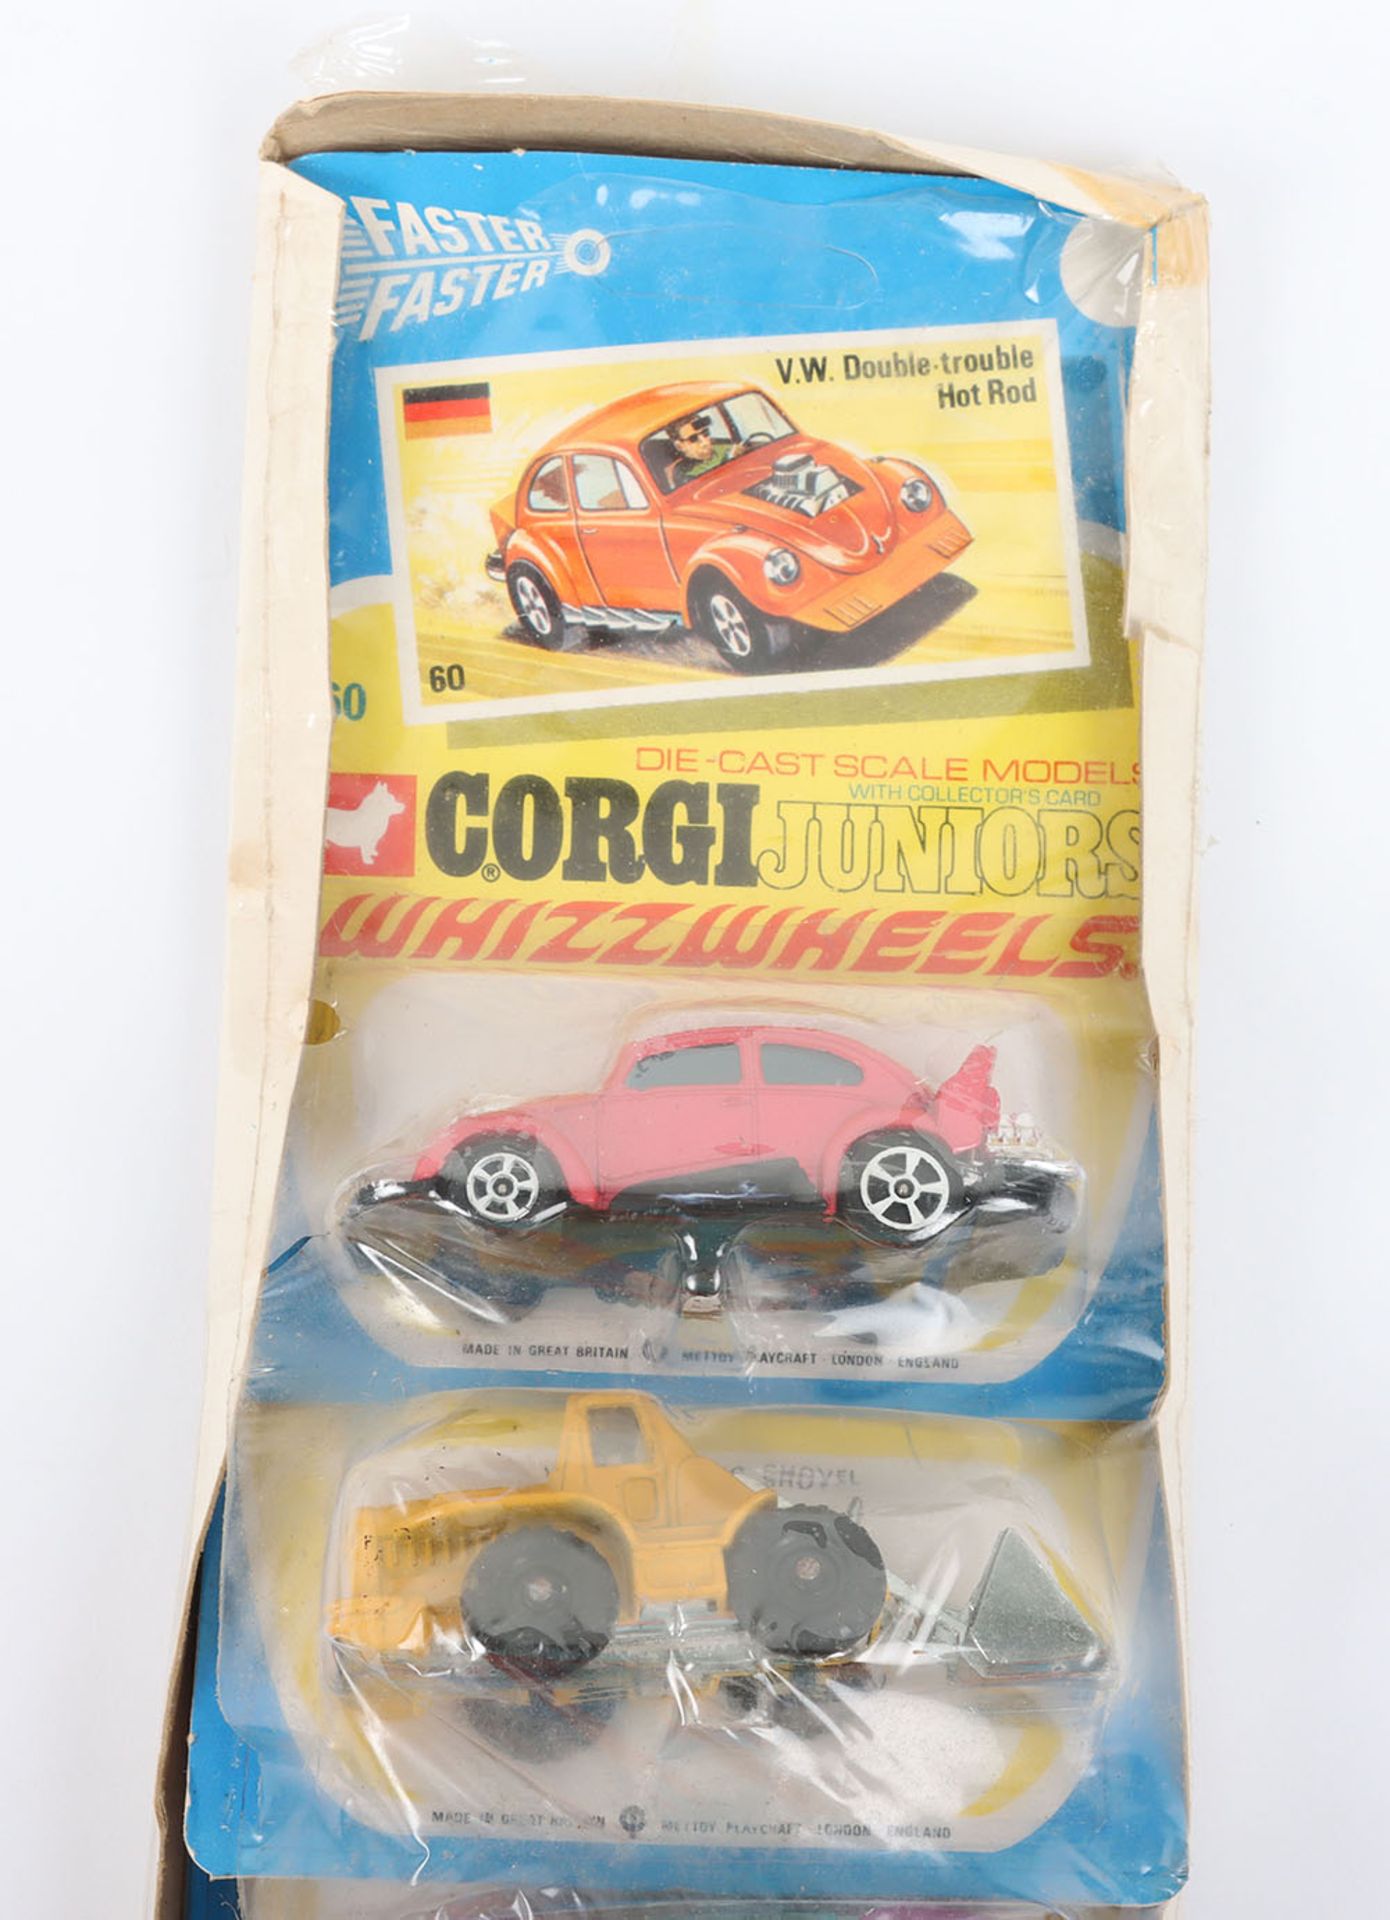 Six Carded Corgi Junior Models with collectors cards Shrunk Wrapped - Image 2 of 7